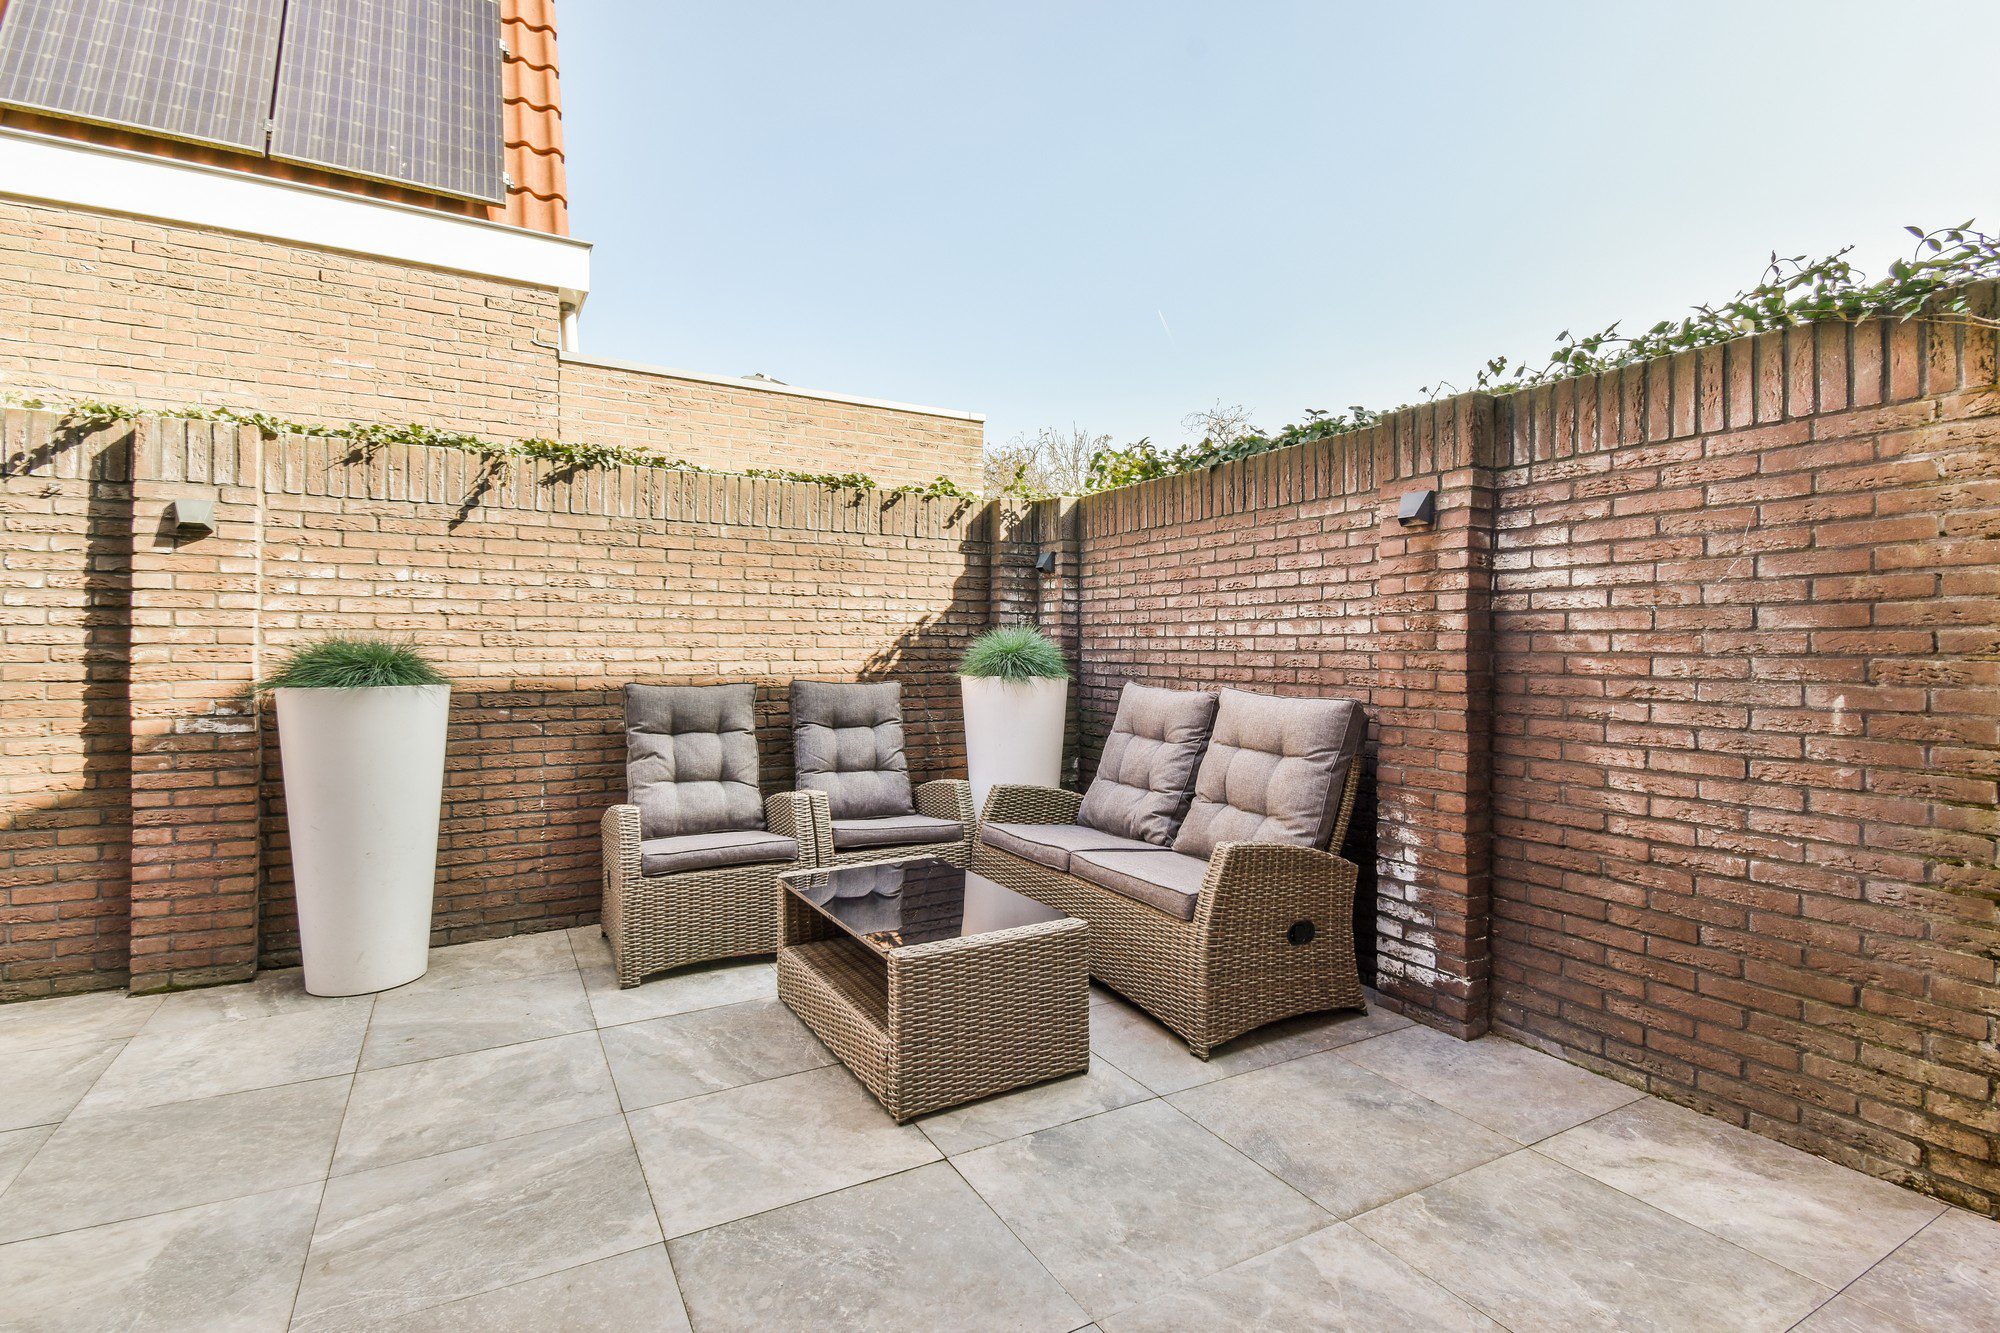 This is an image of an outdoor patio area. The patio is enclosed with weathered brick walls, and the ground is covered with large, square, stone tiles. The space is furnished with a set of wicker patio furniture, which includes two armchairs with gray cushions, a love seat, and a coordinating coffee table with a glass top. There's also a tall white planter with a green plant near the corner of the patio. On the wall, there are some outdoor lights installed, and the top of the wall is adorned with climbing ivy, giving a touch of greenery. A portion of a building with a red tiled roof and a solar panel is visible on the left side, suggesting a focus on sustainability. The sky appears clear and sunny, indicating pleasant weather.